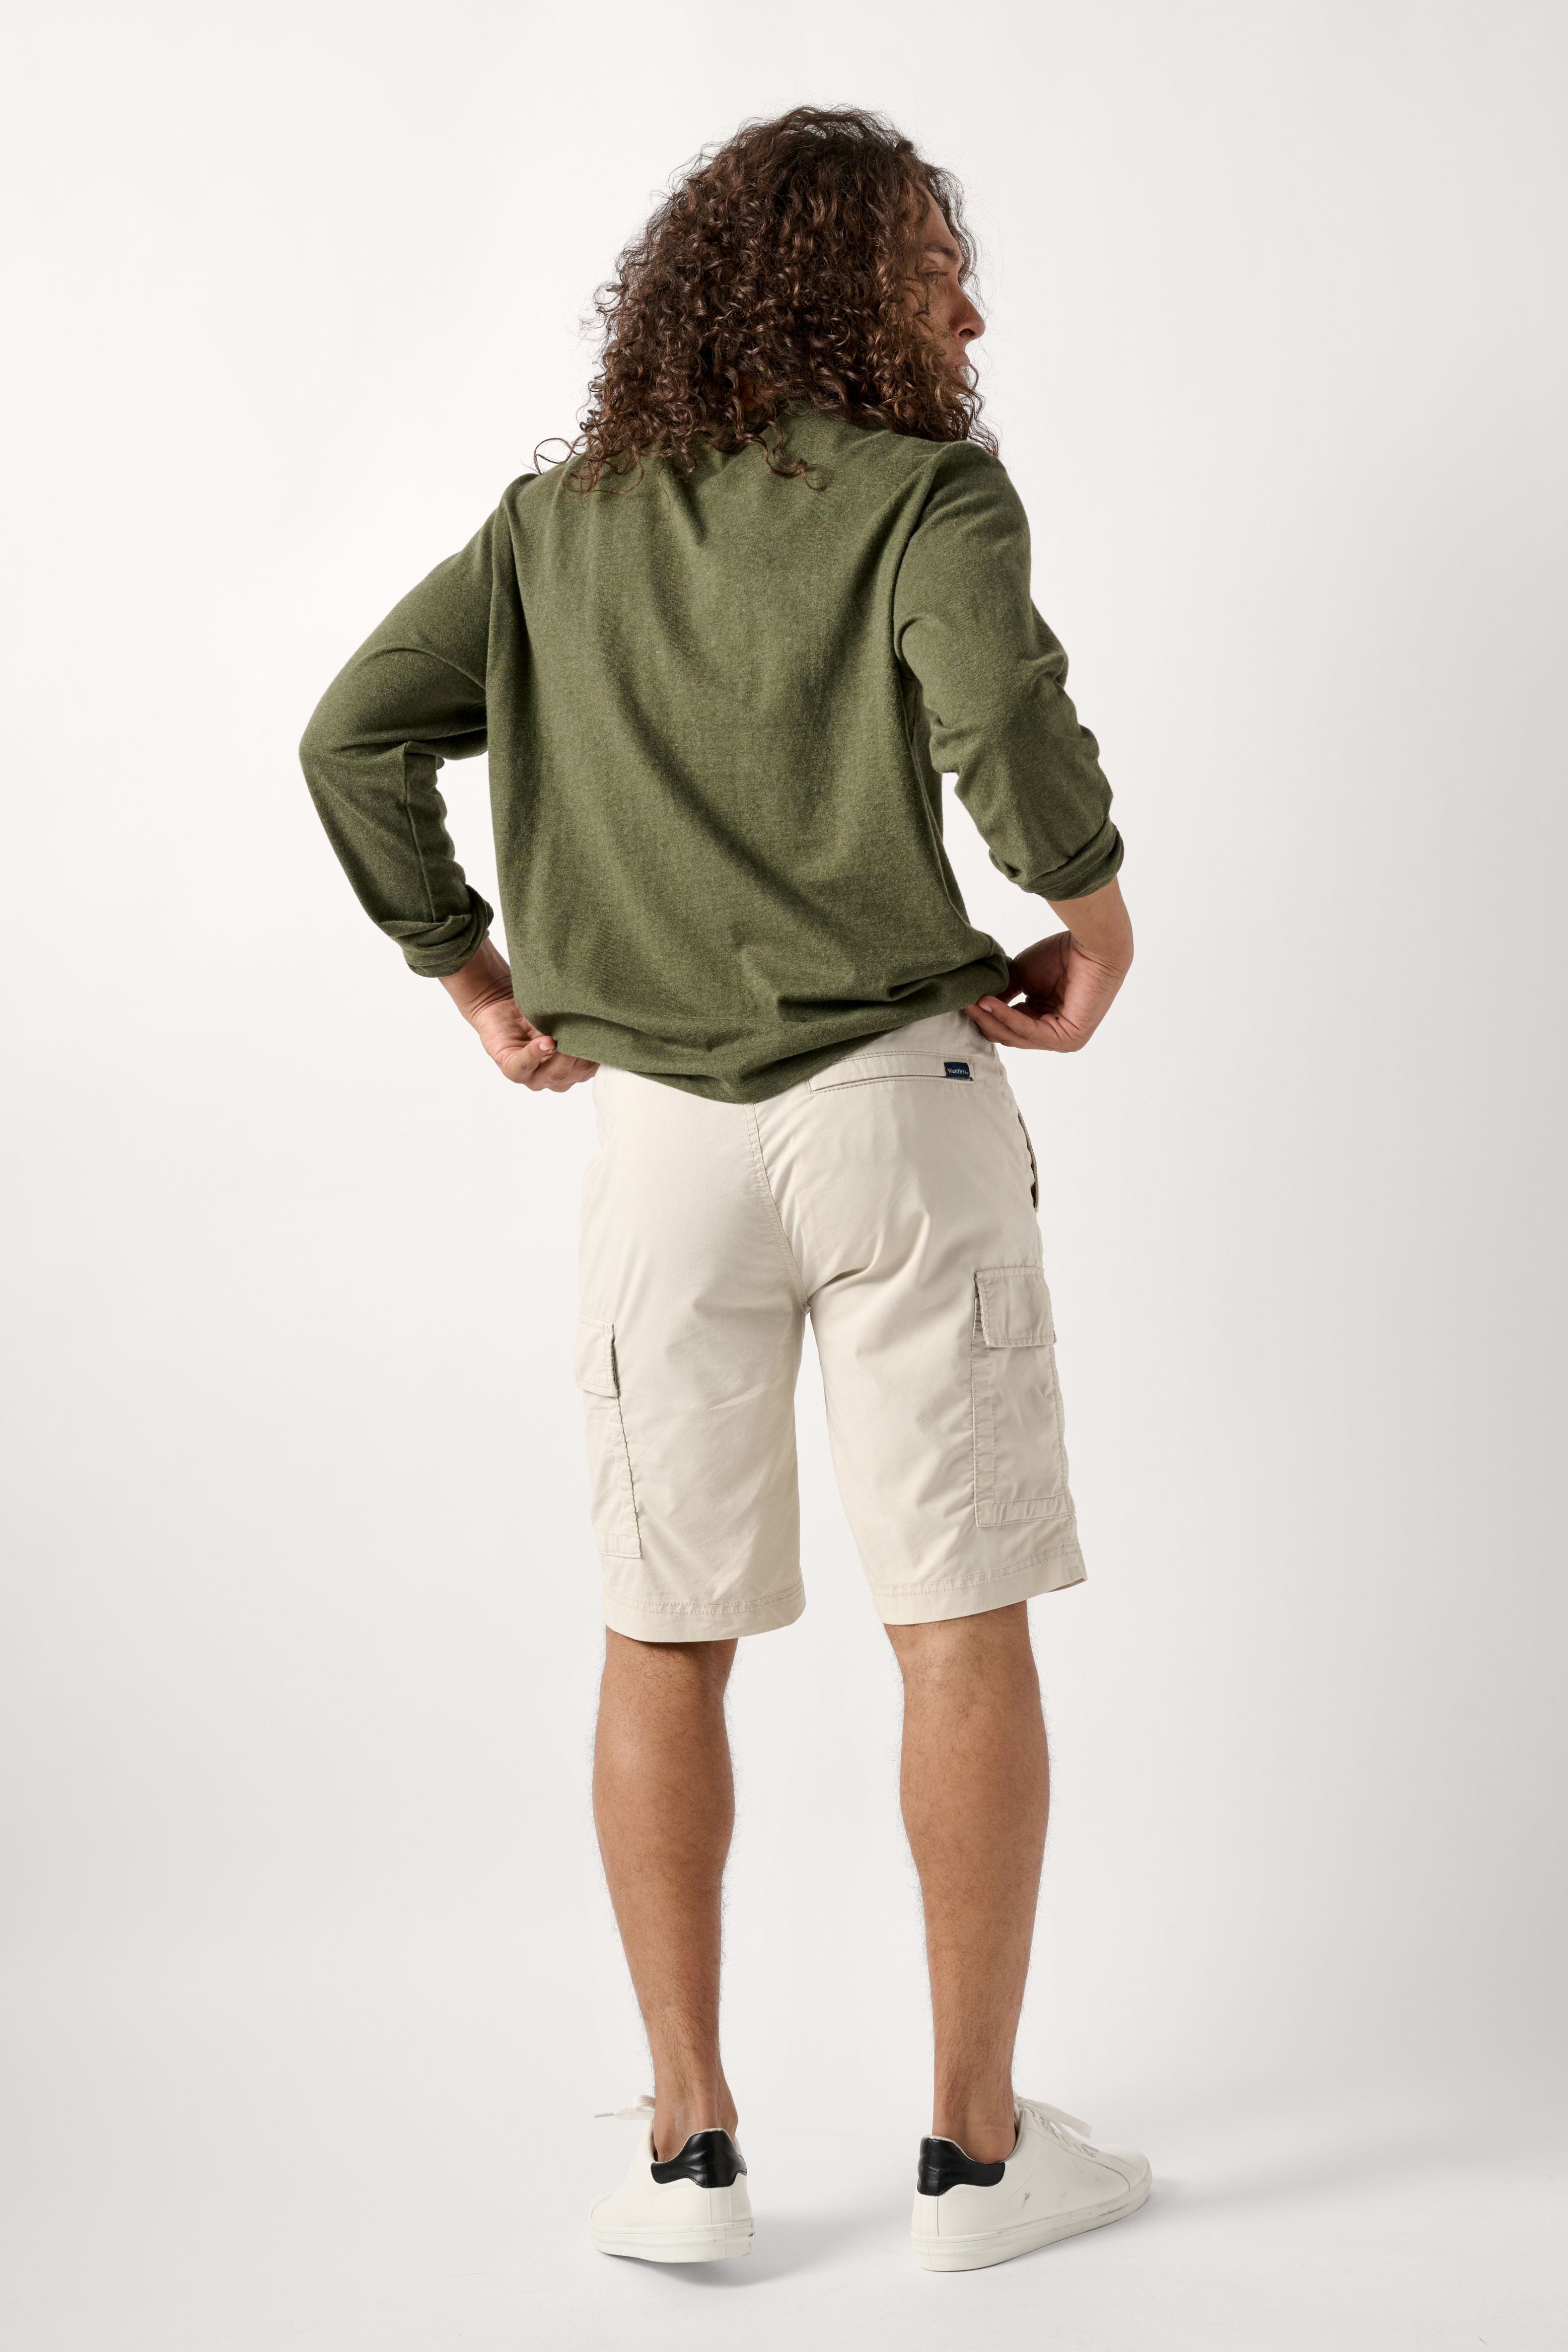 Male model dressed in the WEARFIRST Pacer Cargo Short with a drawstring in Pelican